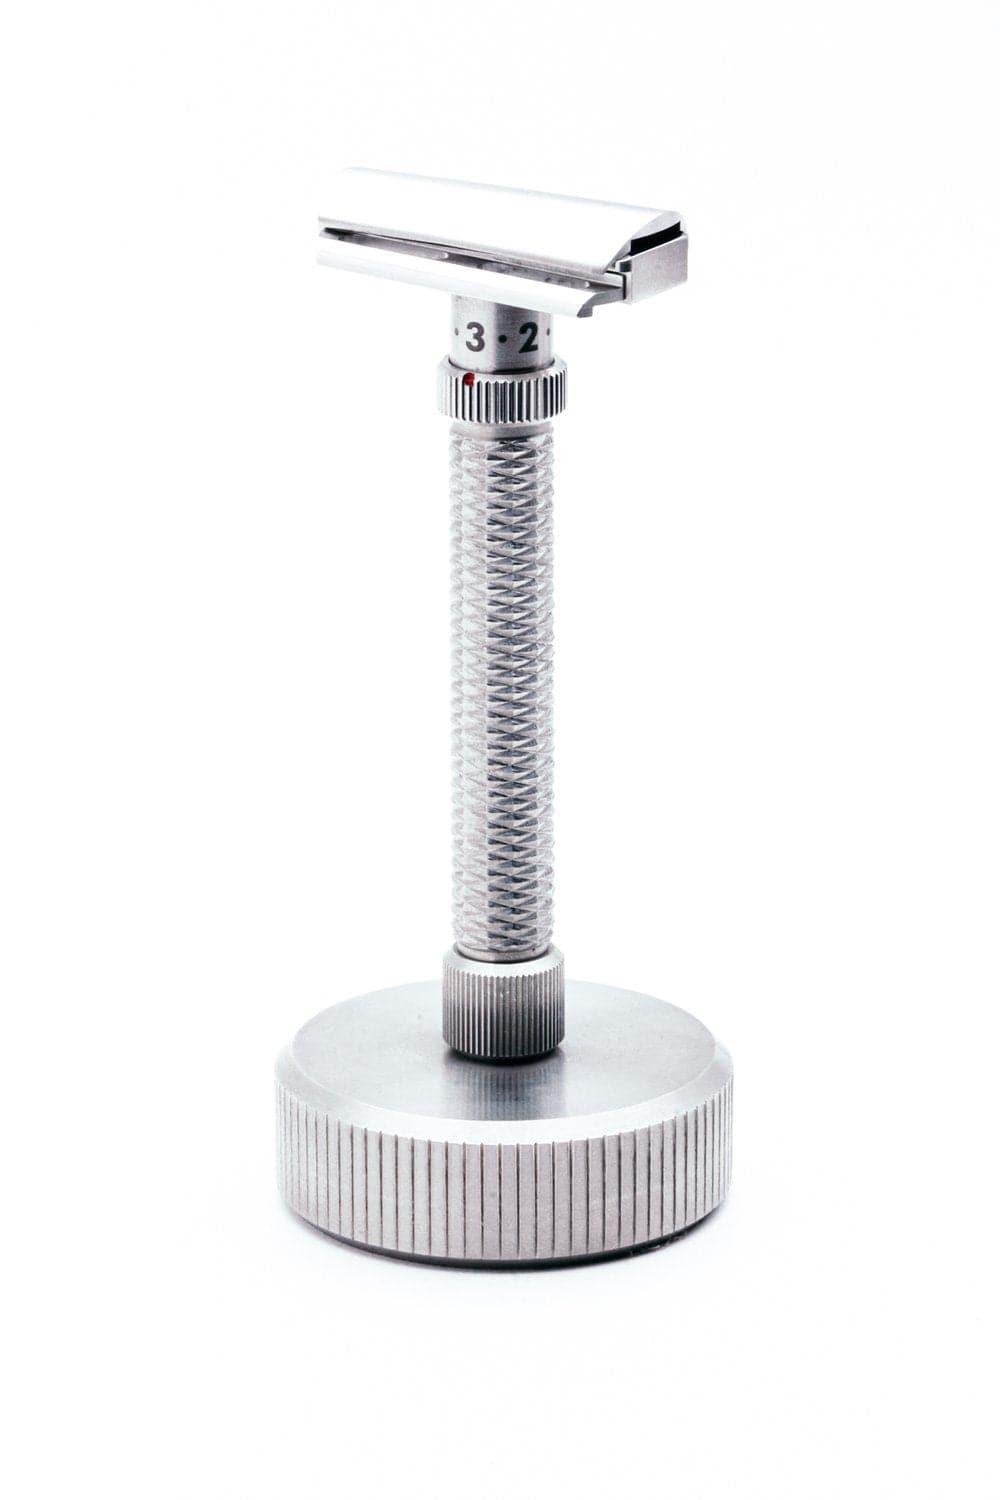 Konsul XL Slant Adjustable Stainless Steel DE Safety Razor - by Rex Supply Co. Safety Razor Murphy and McNeil Store 